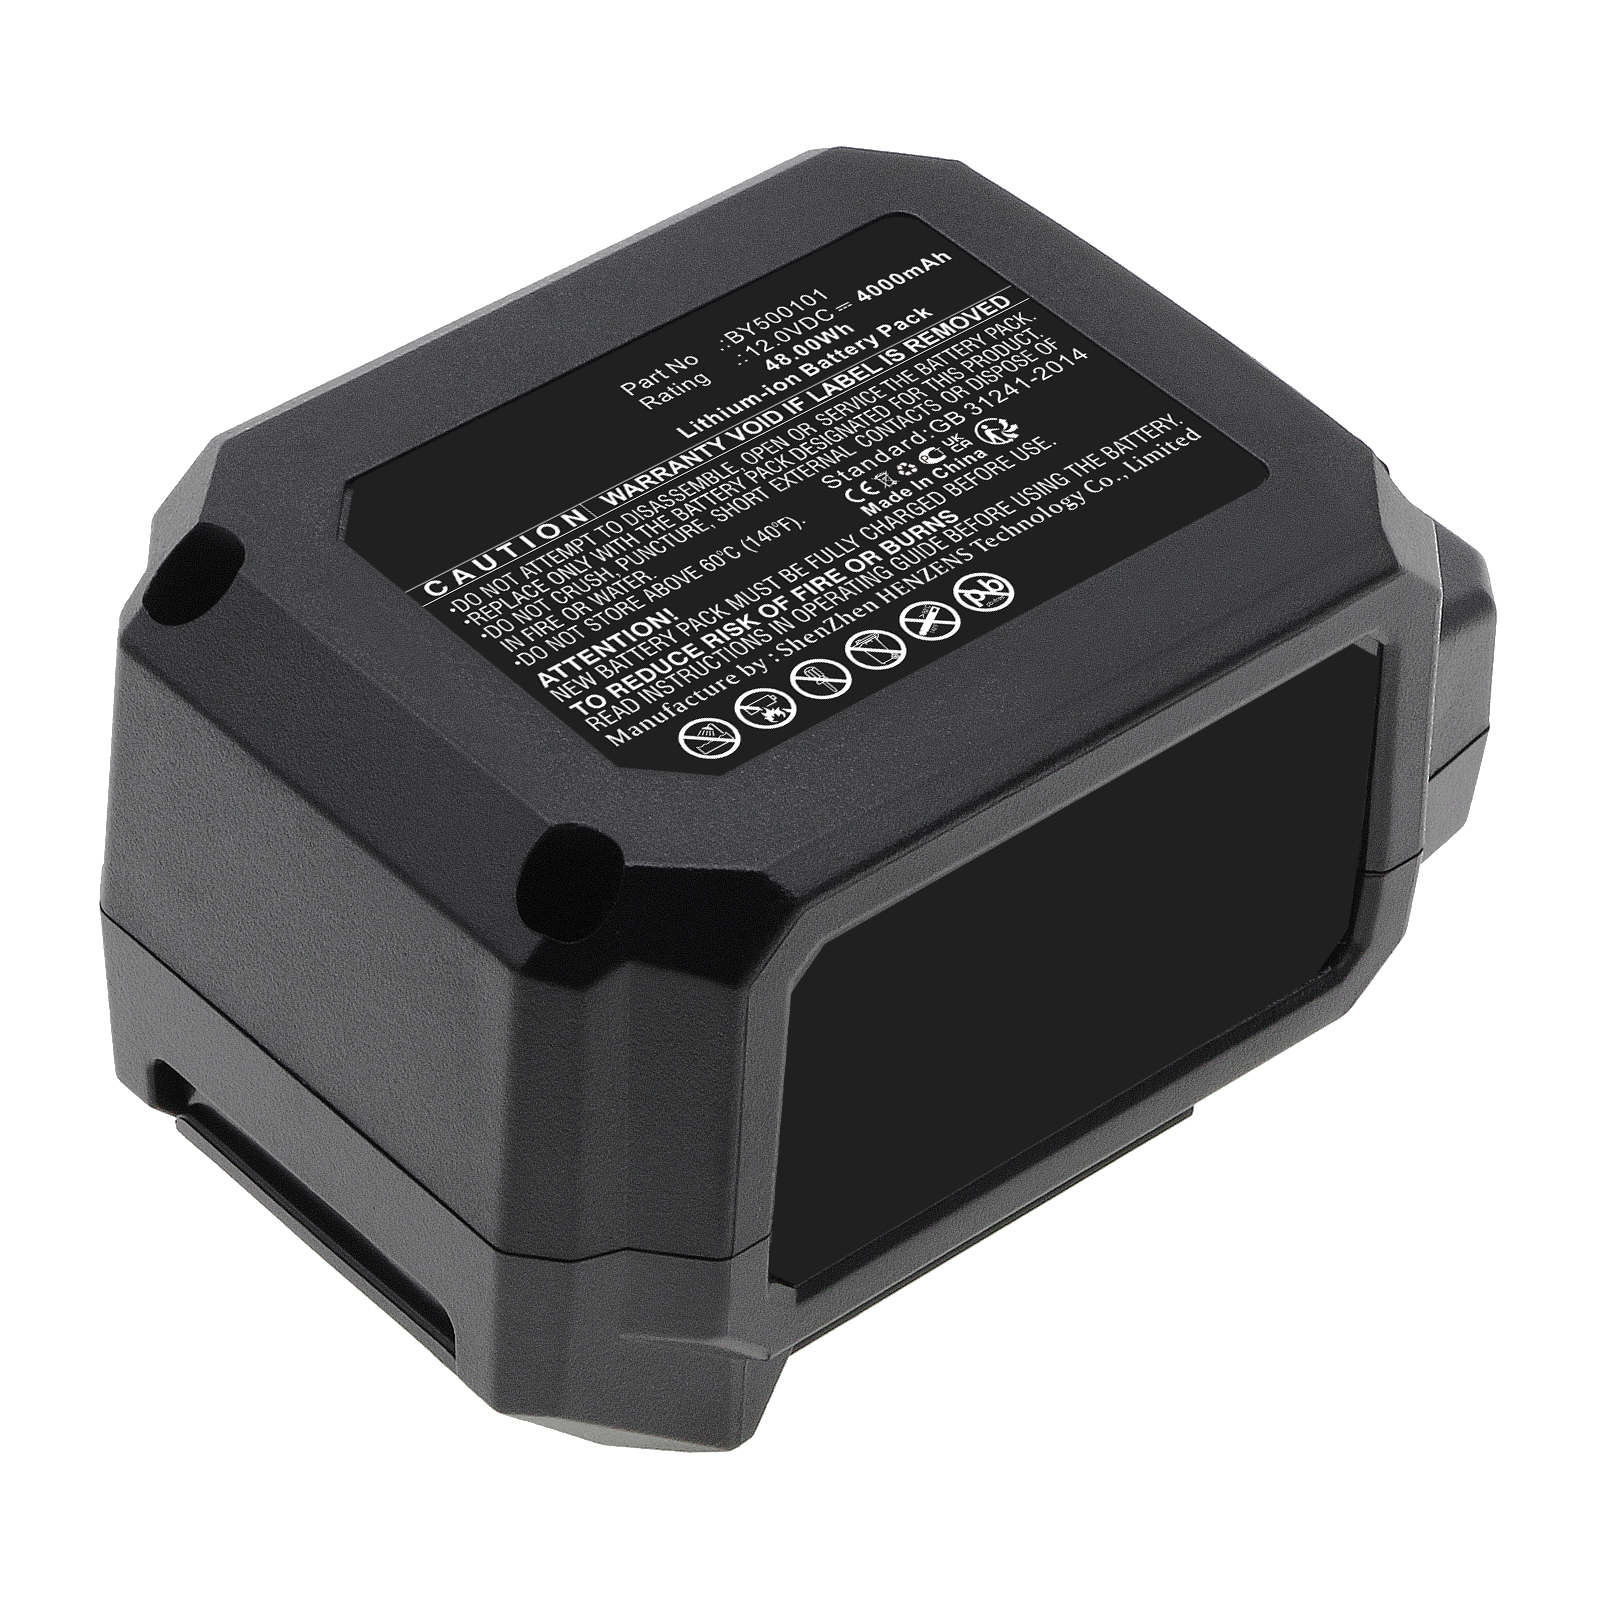 Synergy Digital Power Tool Battery, Compatible with Skil BY519702 Power Tool Battery (Li-ion, 20V, 4000mAh)